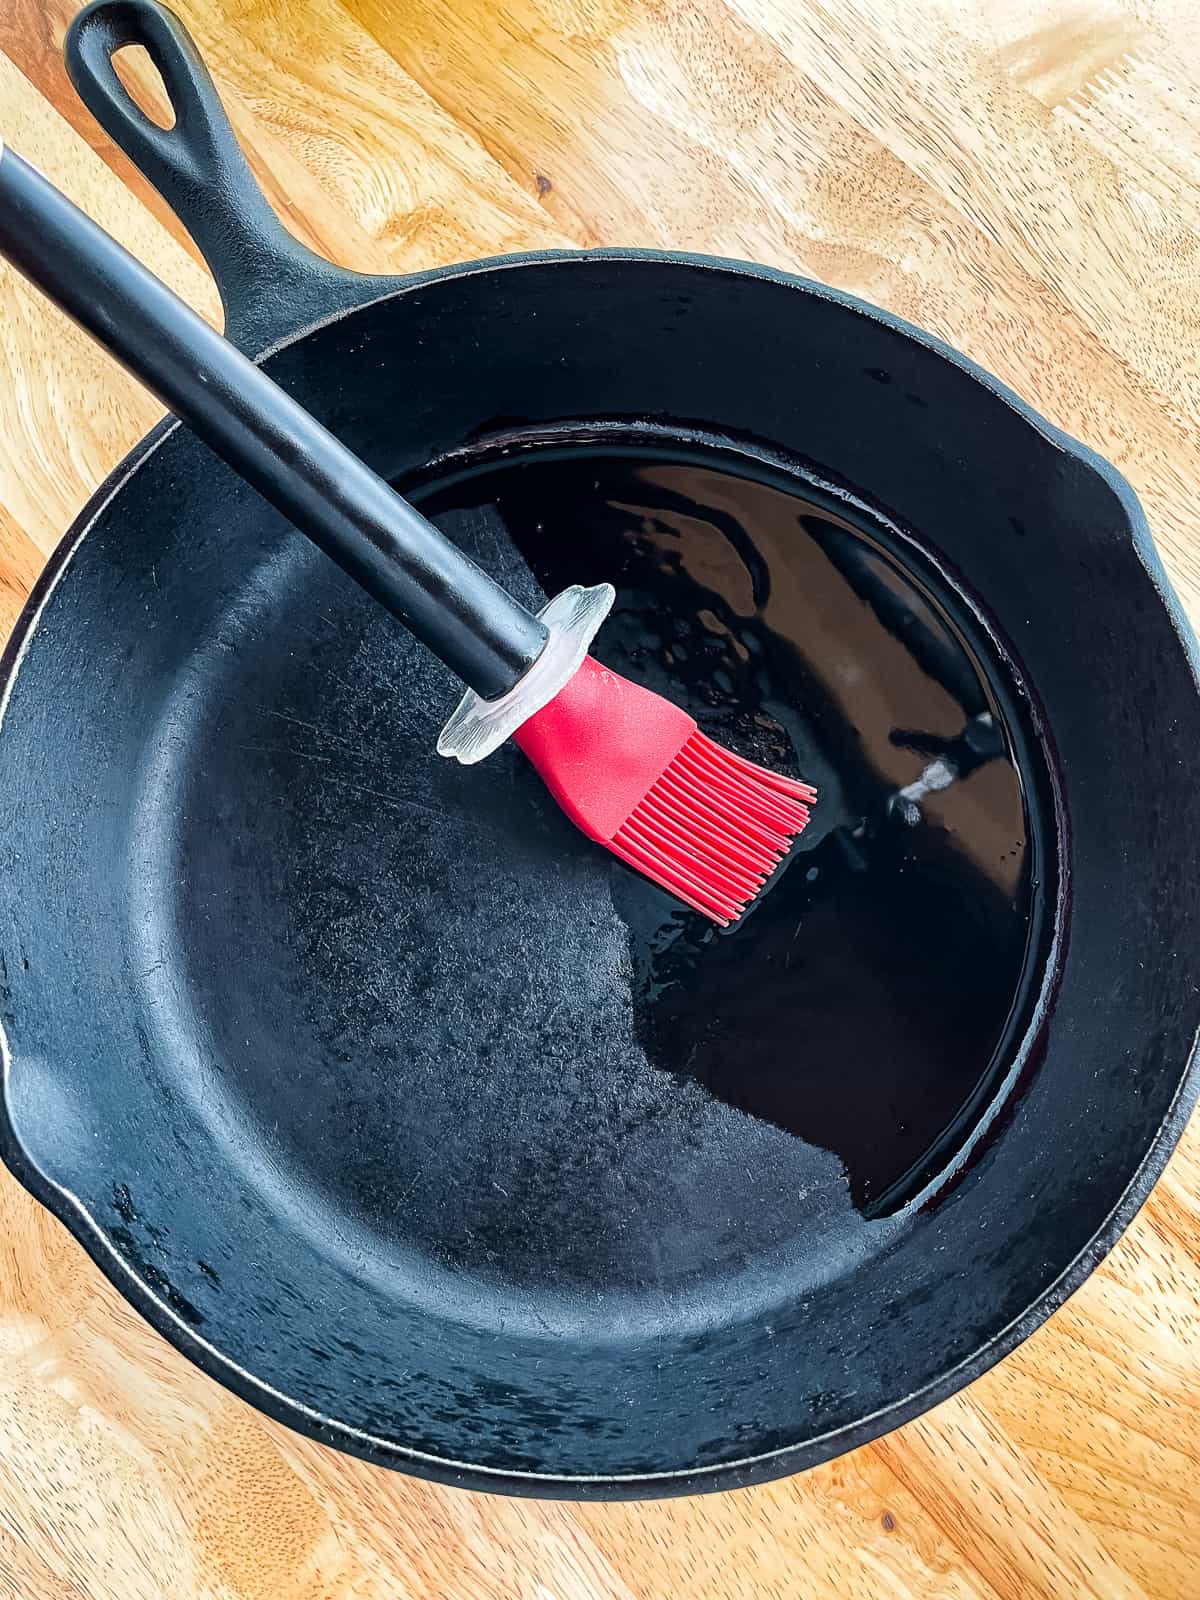 Oiling cast iron skillet.